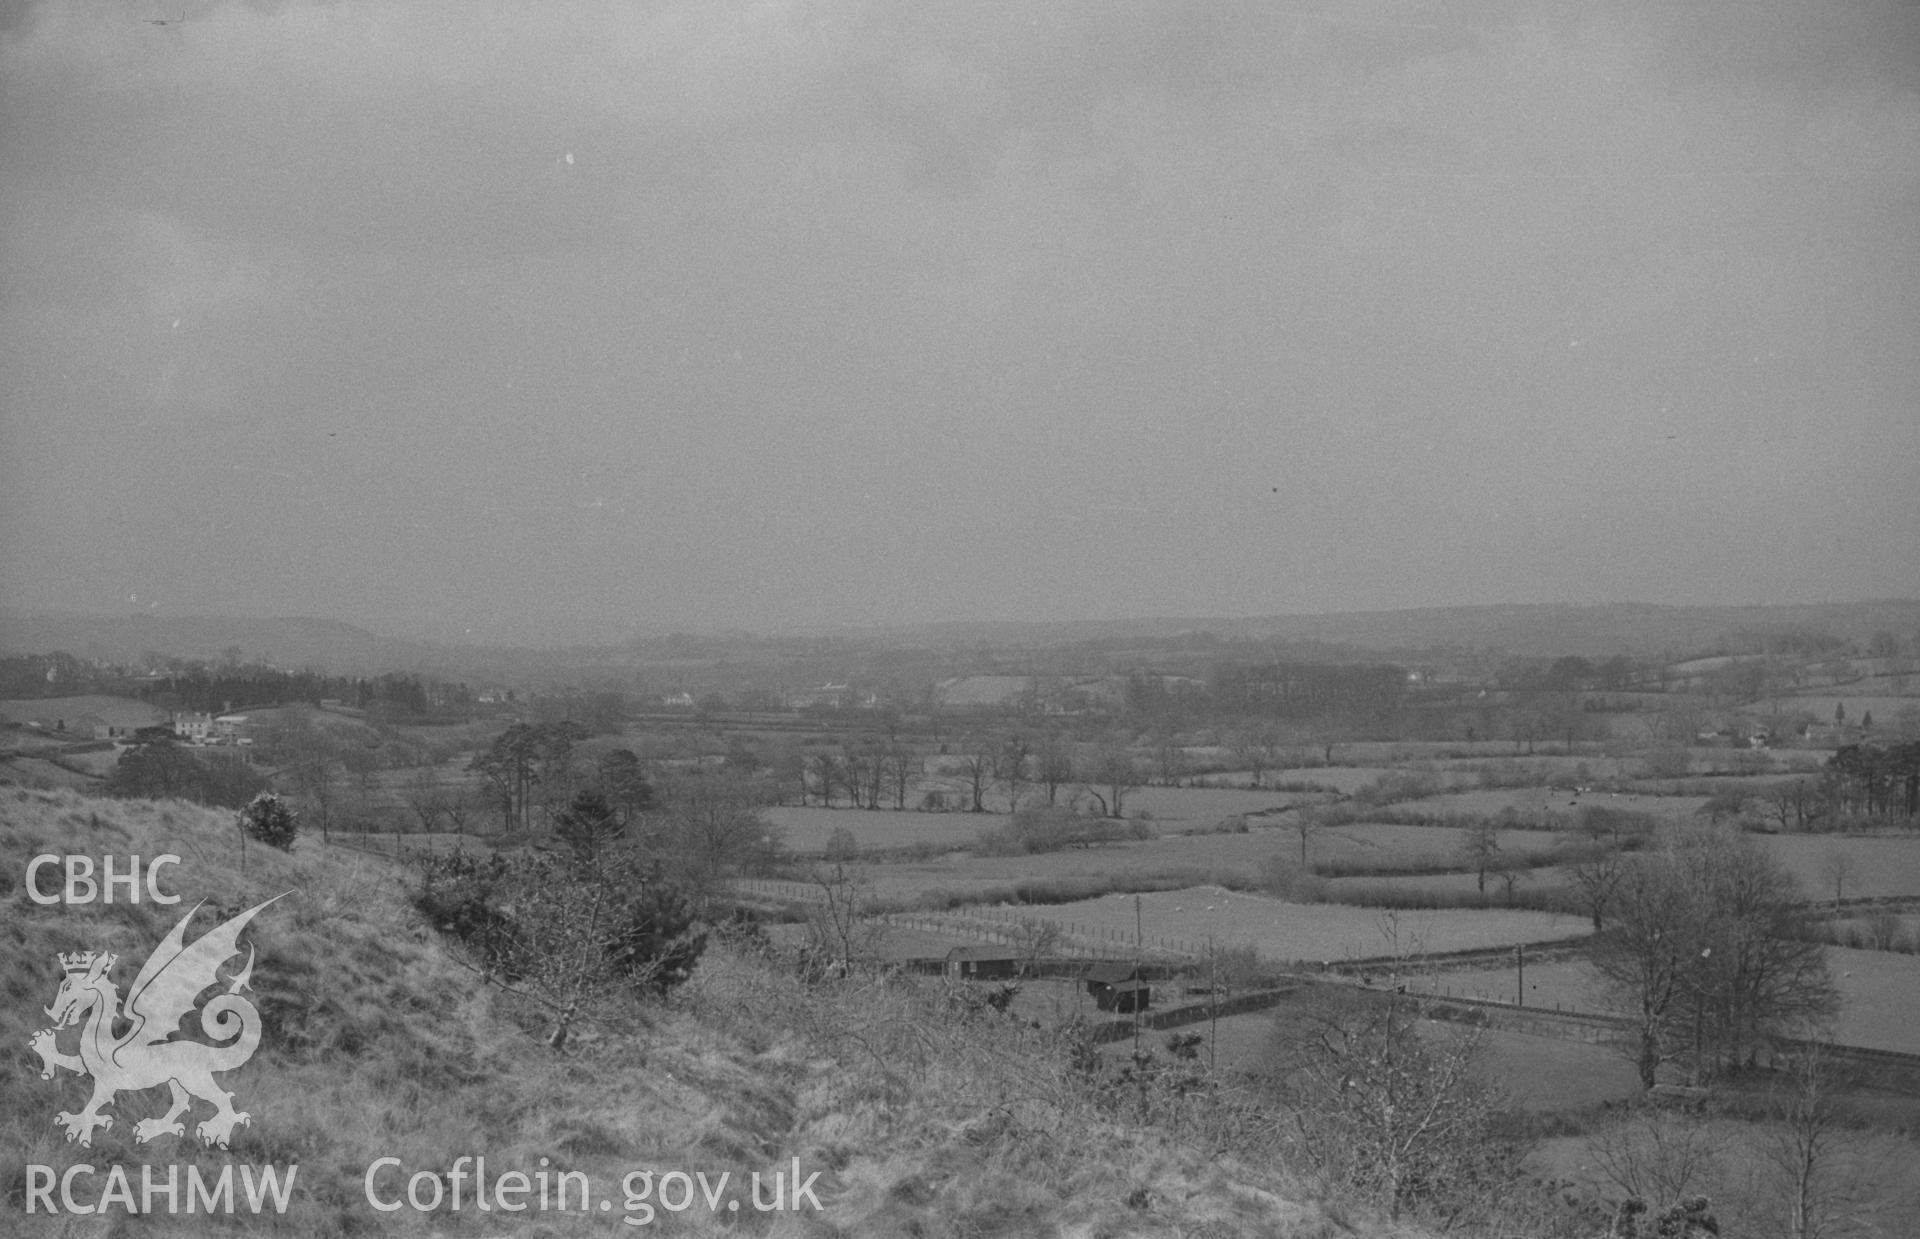 Digital copy of black & white negative showing view from outside Pencarreg churchyard towards railway line, with Llanybydder and Castell Dol-Wlff in distance. Photographed by Arthur O. Chater in April 1967 looking west south west SN 534 450.